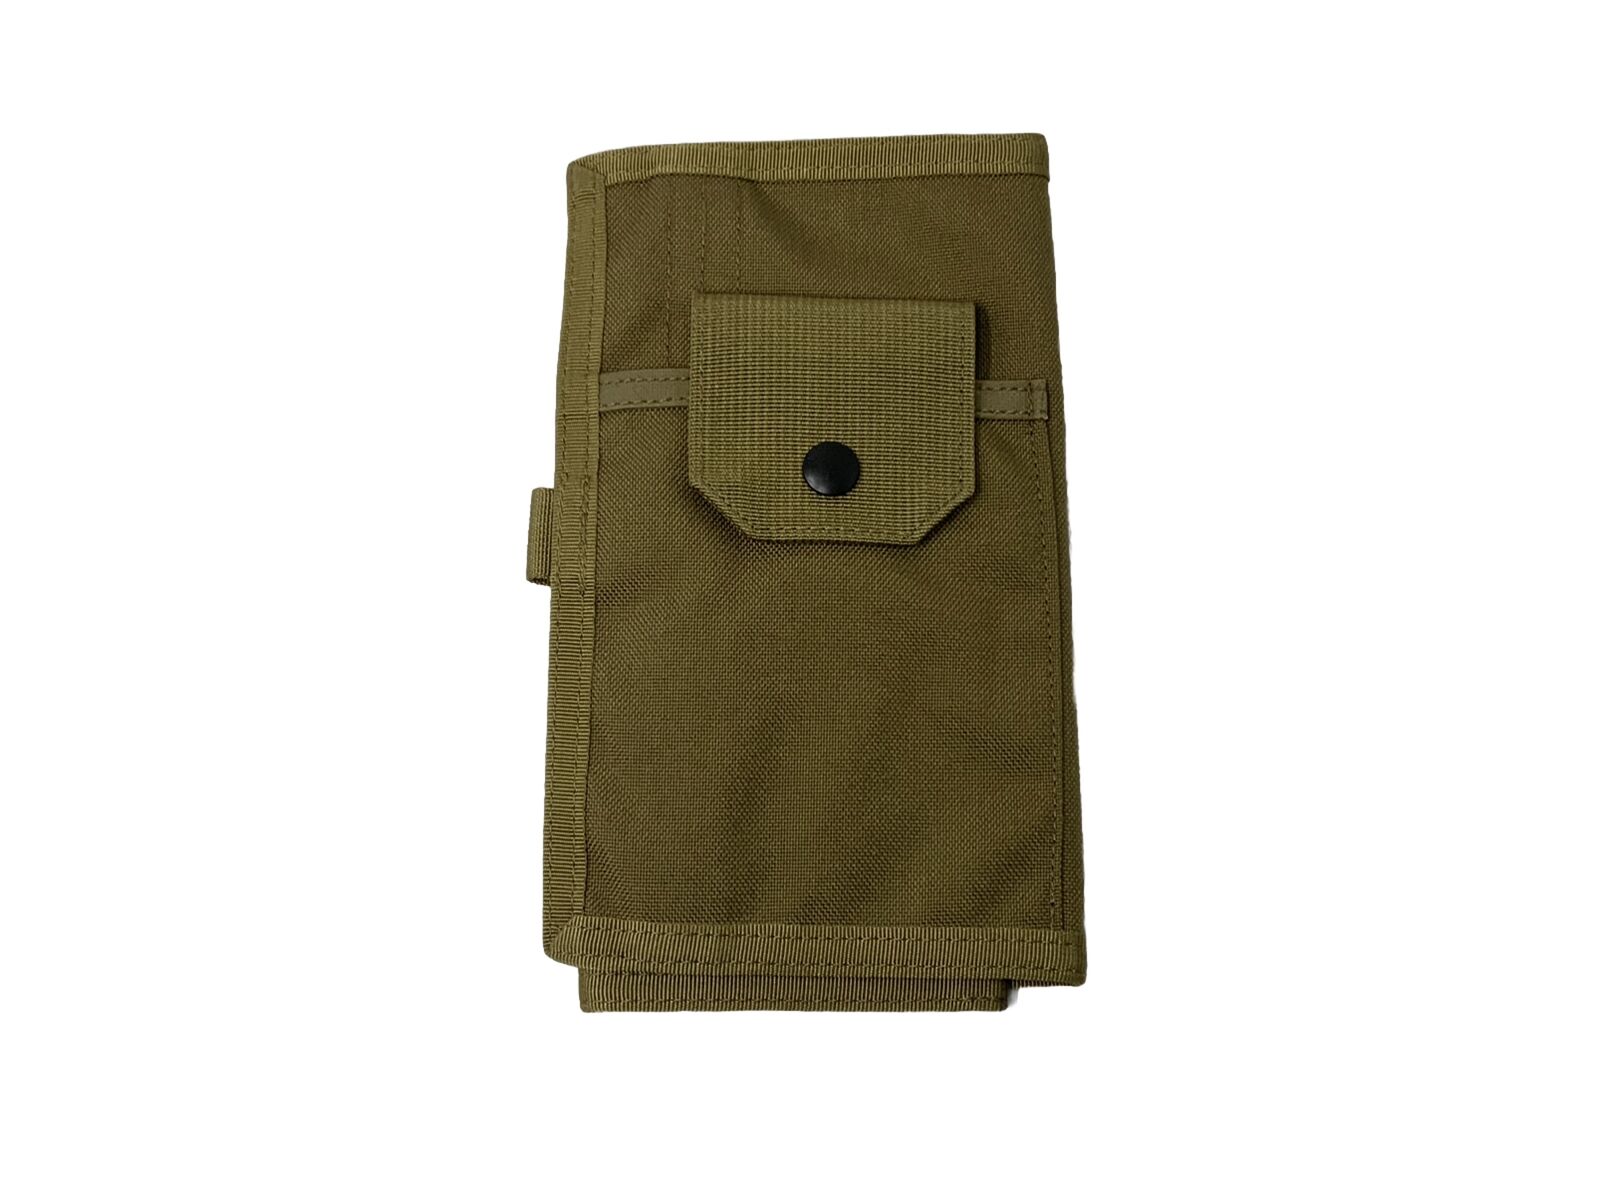 Blackhawk Industries 50MP01CT Tactical Field Map Pouch, Coyote Tan, NIP